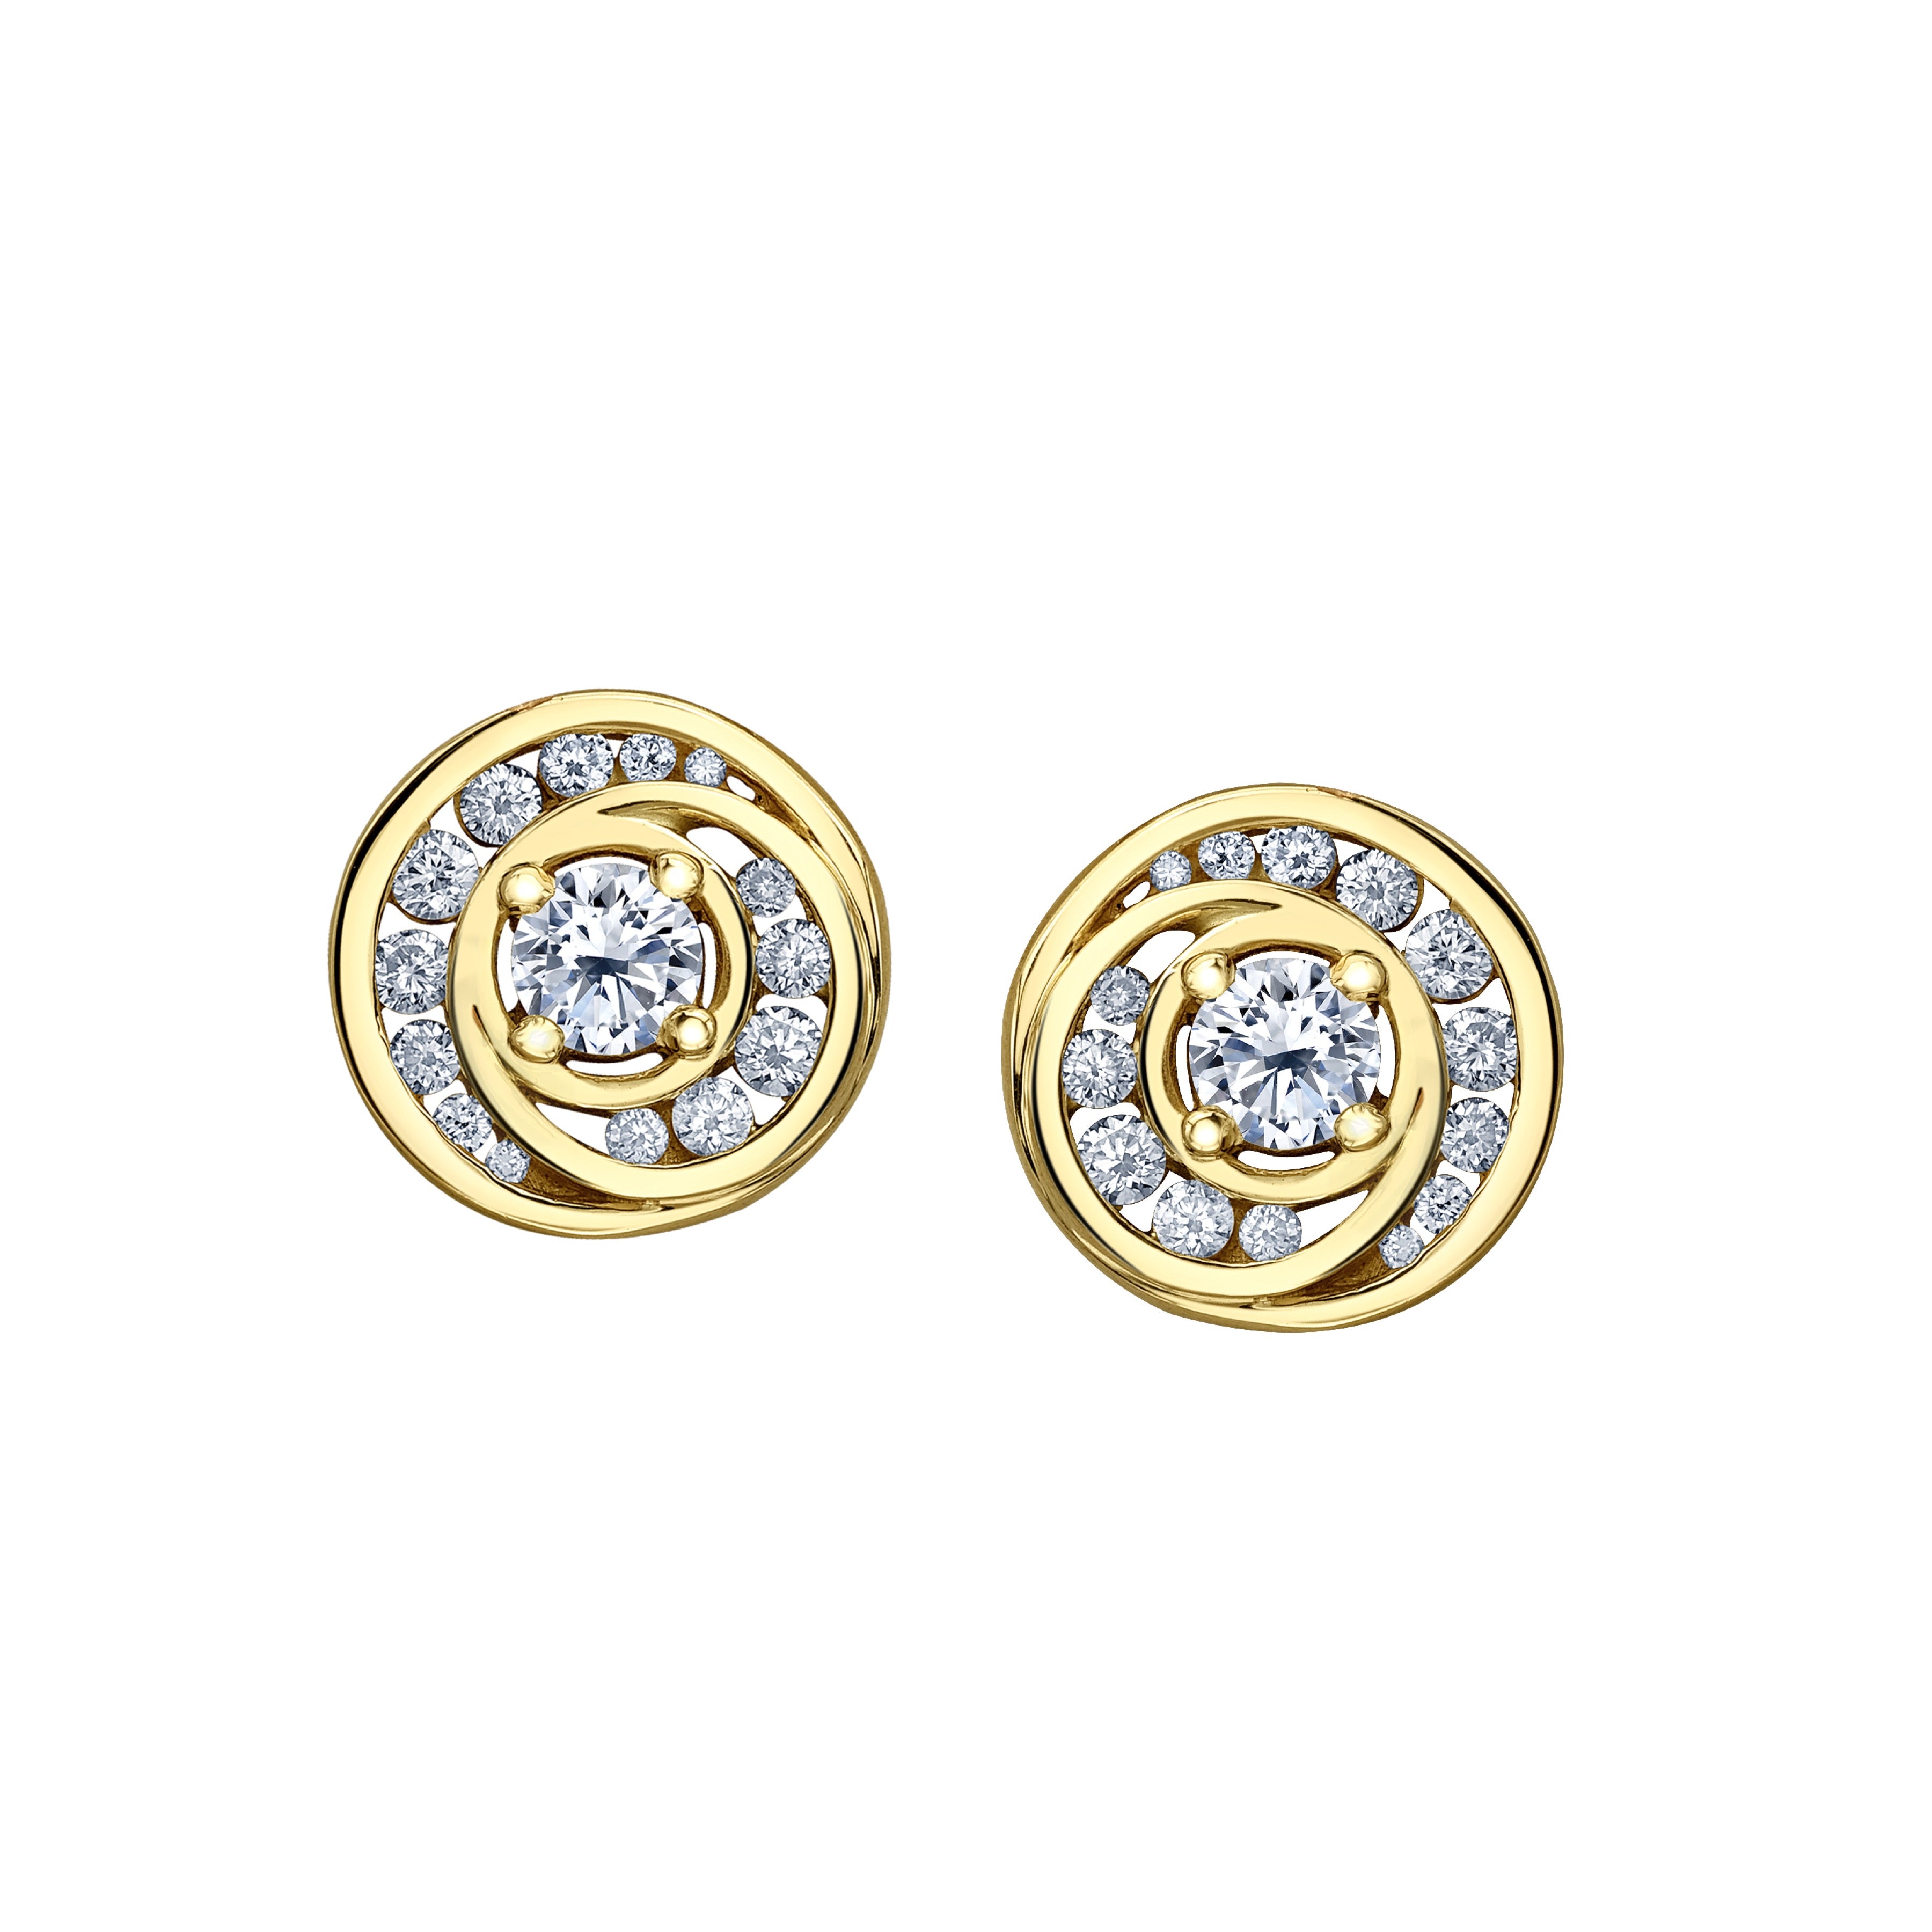 Crafted in 14KT yellow Certified Canadian Gold, these earrings feature full moons set with round brilliant-cut Canadian diamonds.